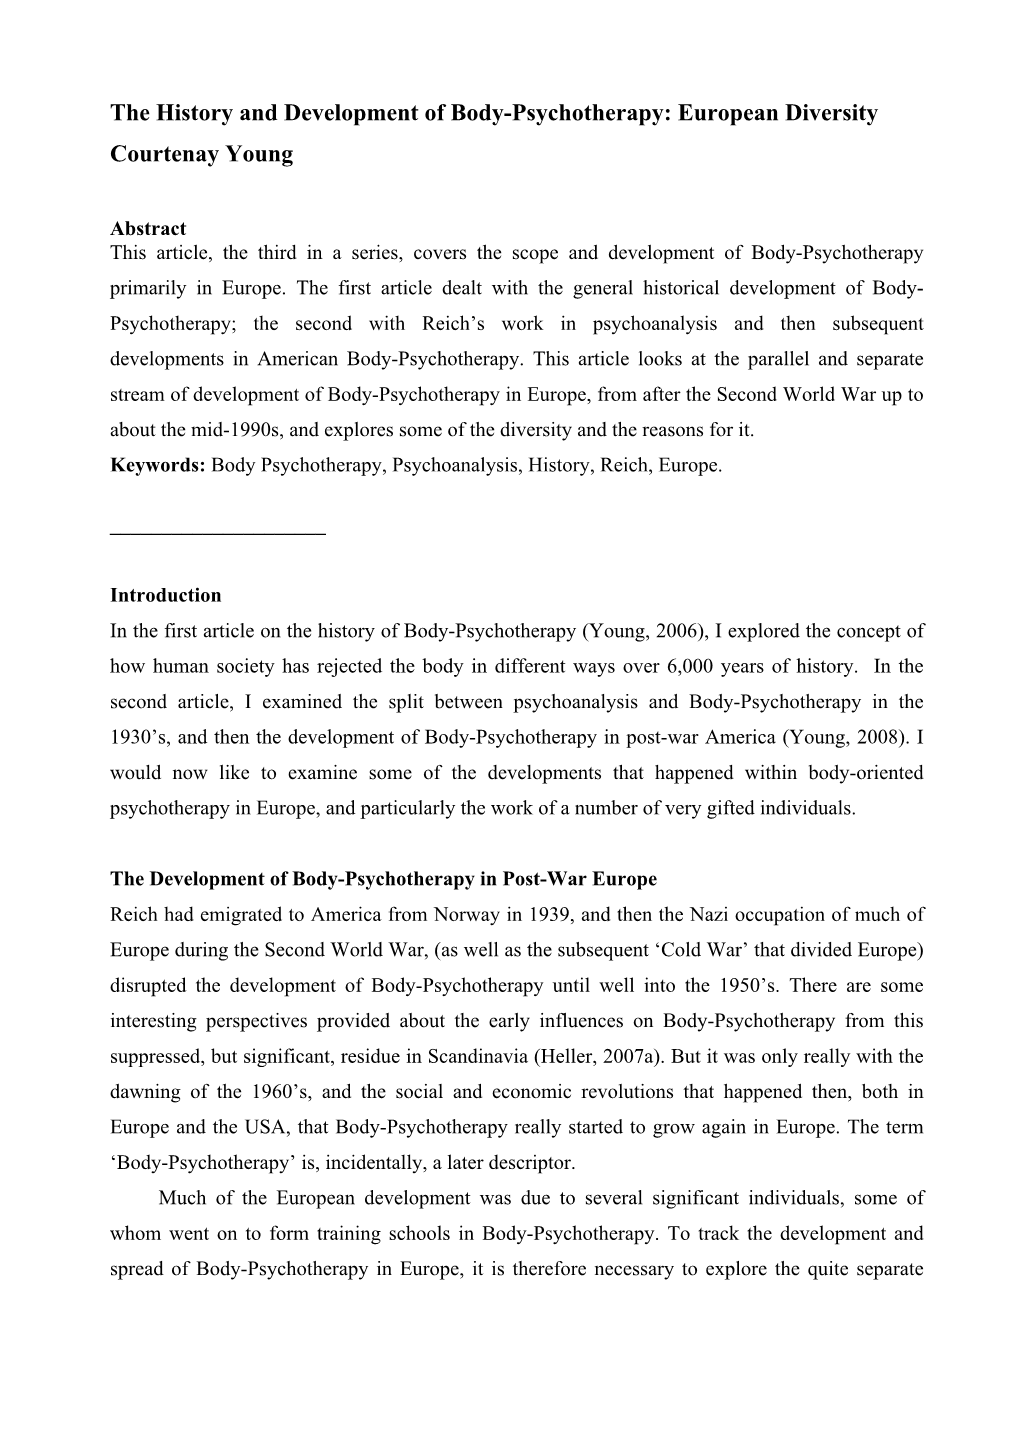 The History and Development of Body-Psychotherapy: European Diversity Courtenay Young